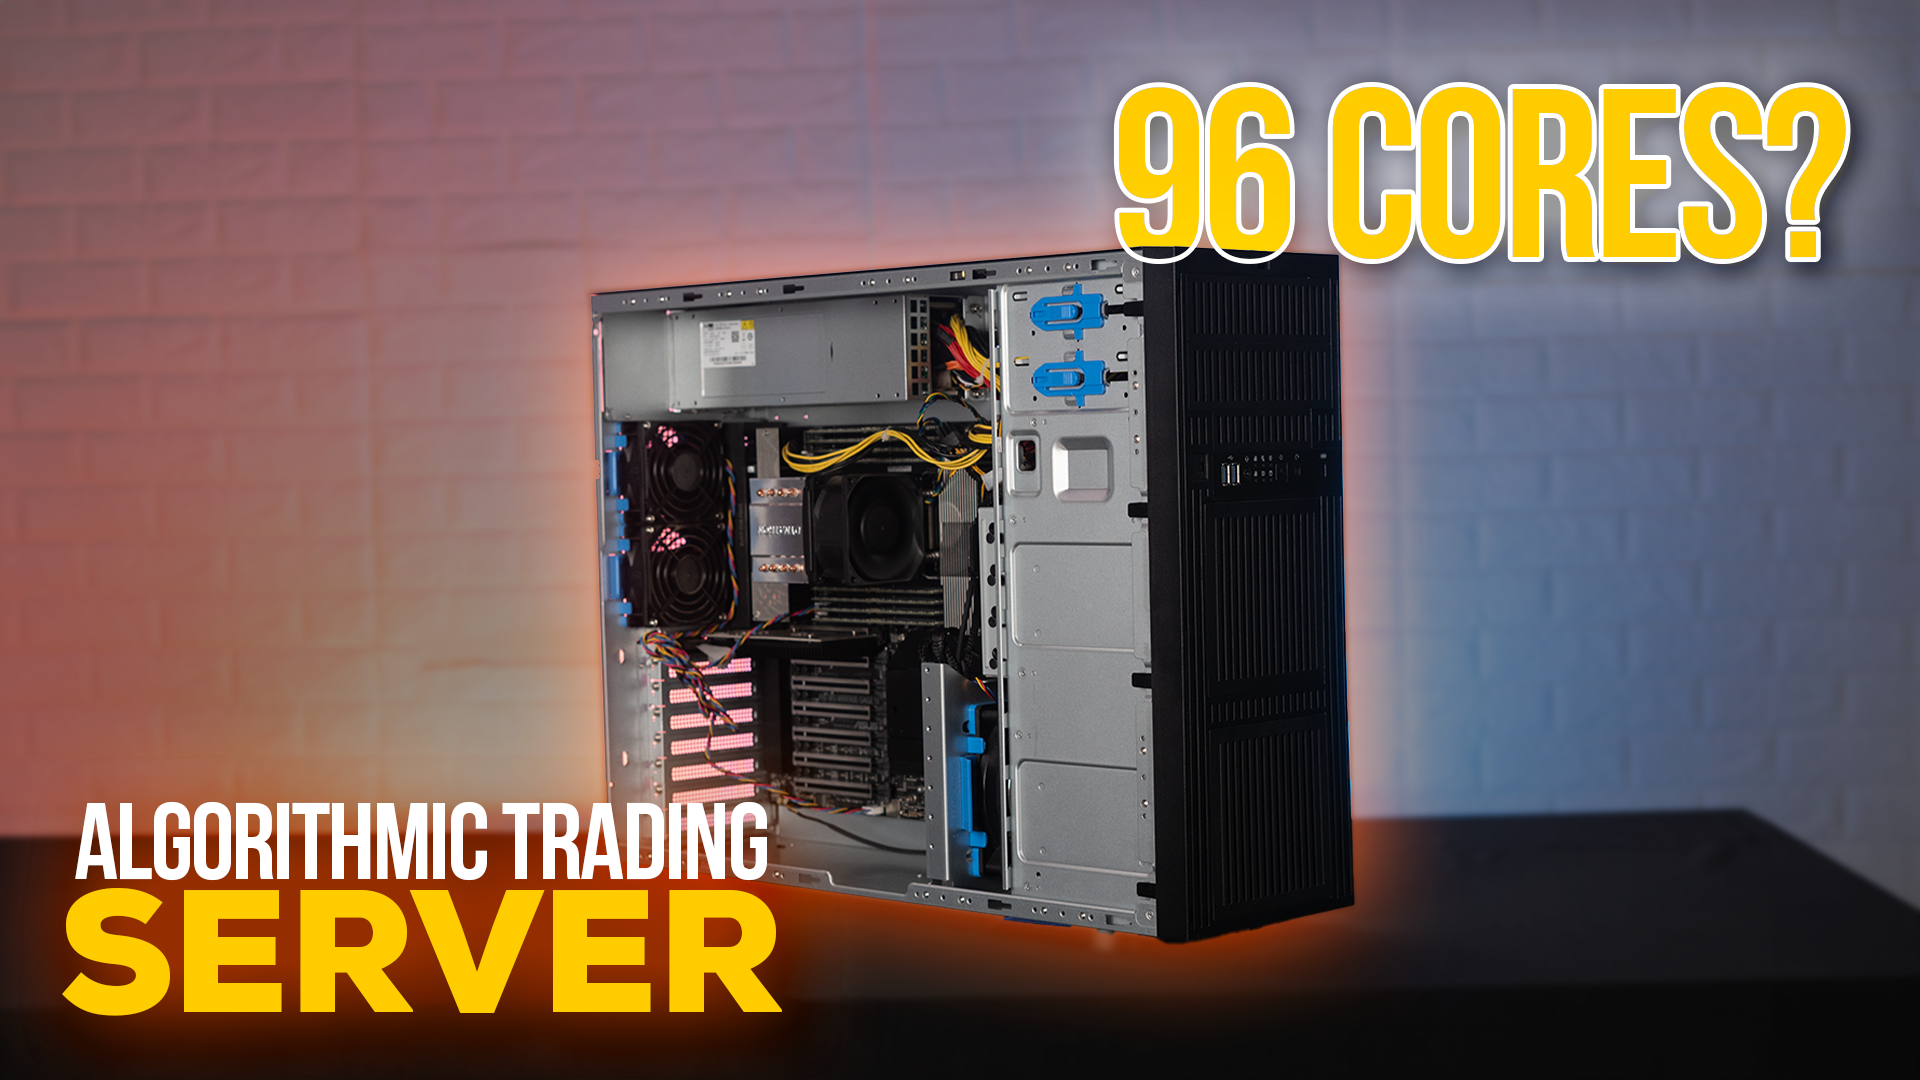 Custom Server for Algorithmic Trading (96 CORES CPU) – Quantitative or High-Frequency Trading | TheMVP